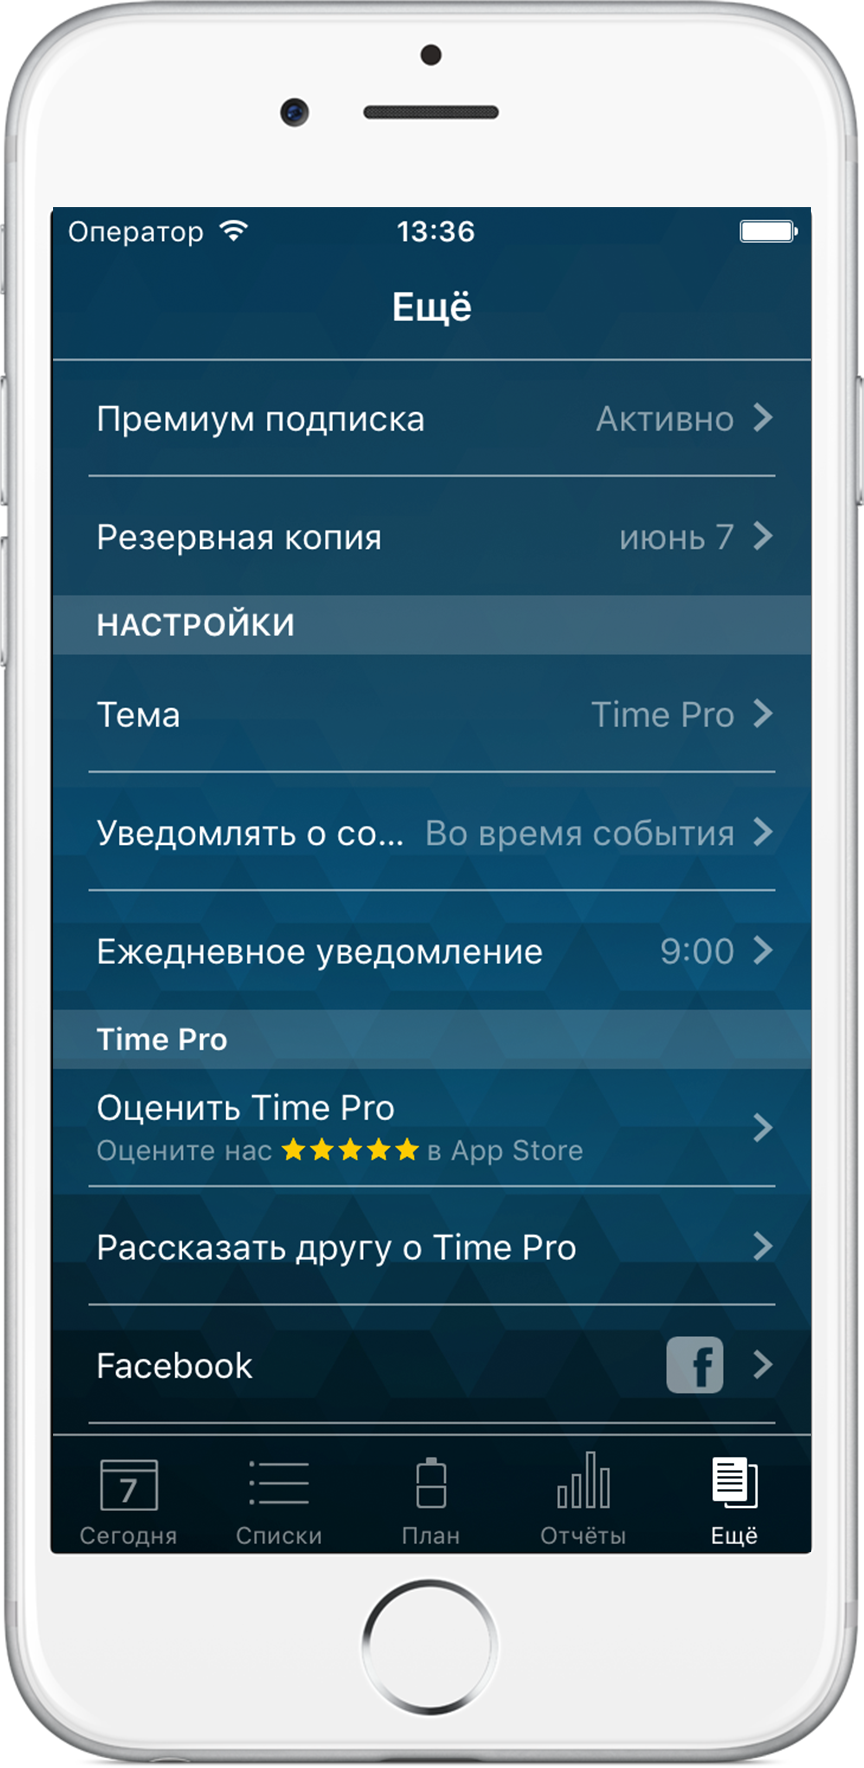 Time Pro for iPhone - More